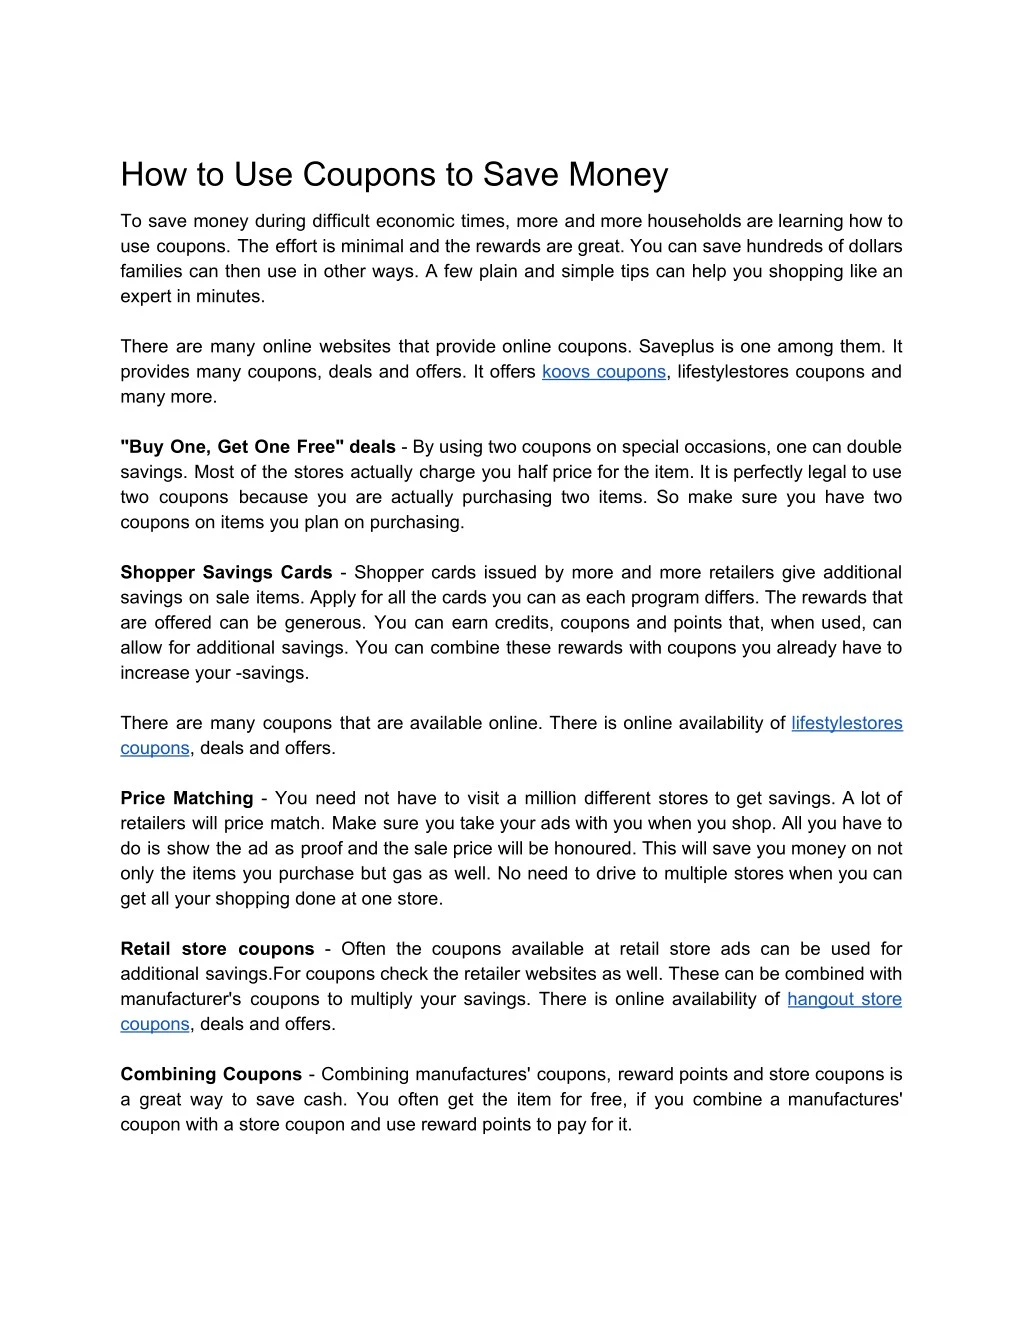 how to use coupons to save money